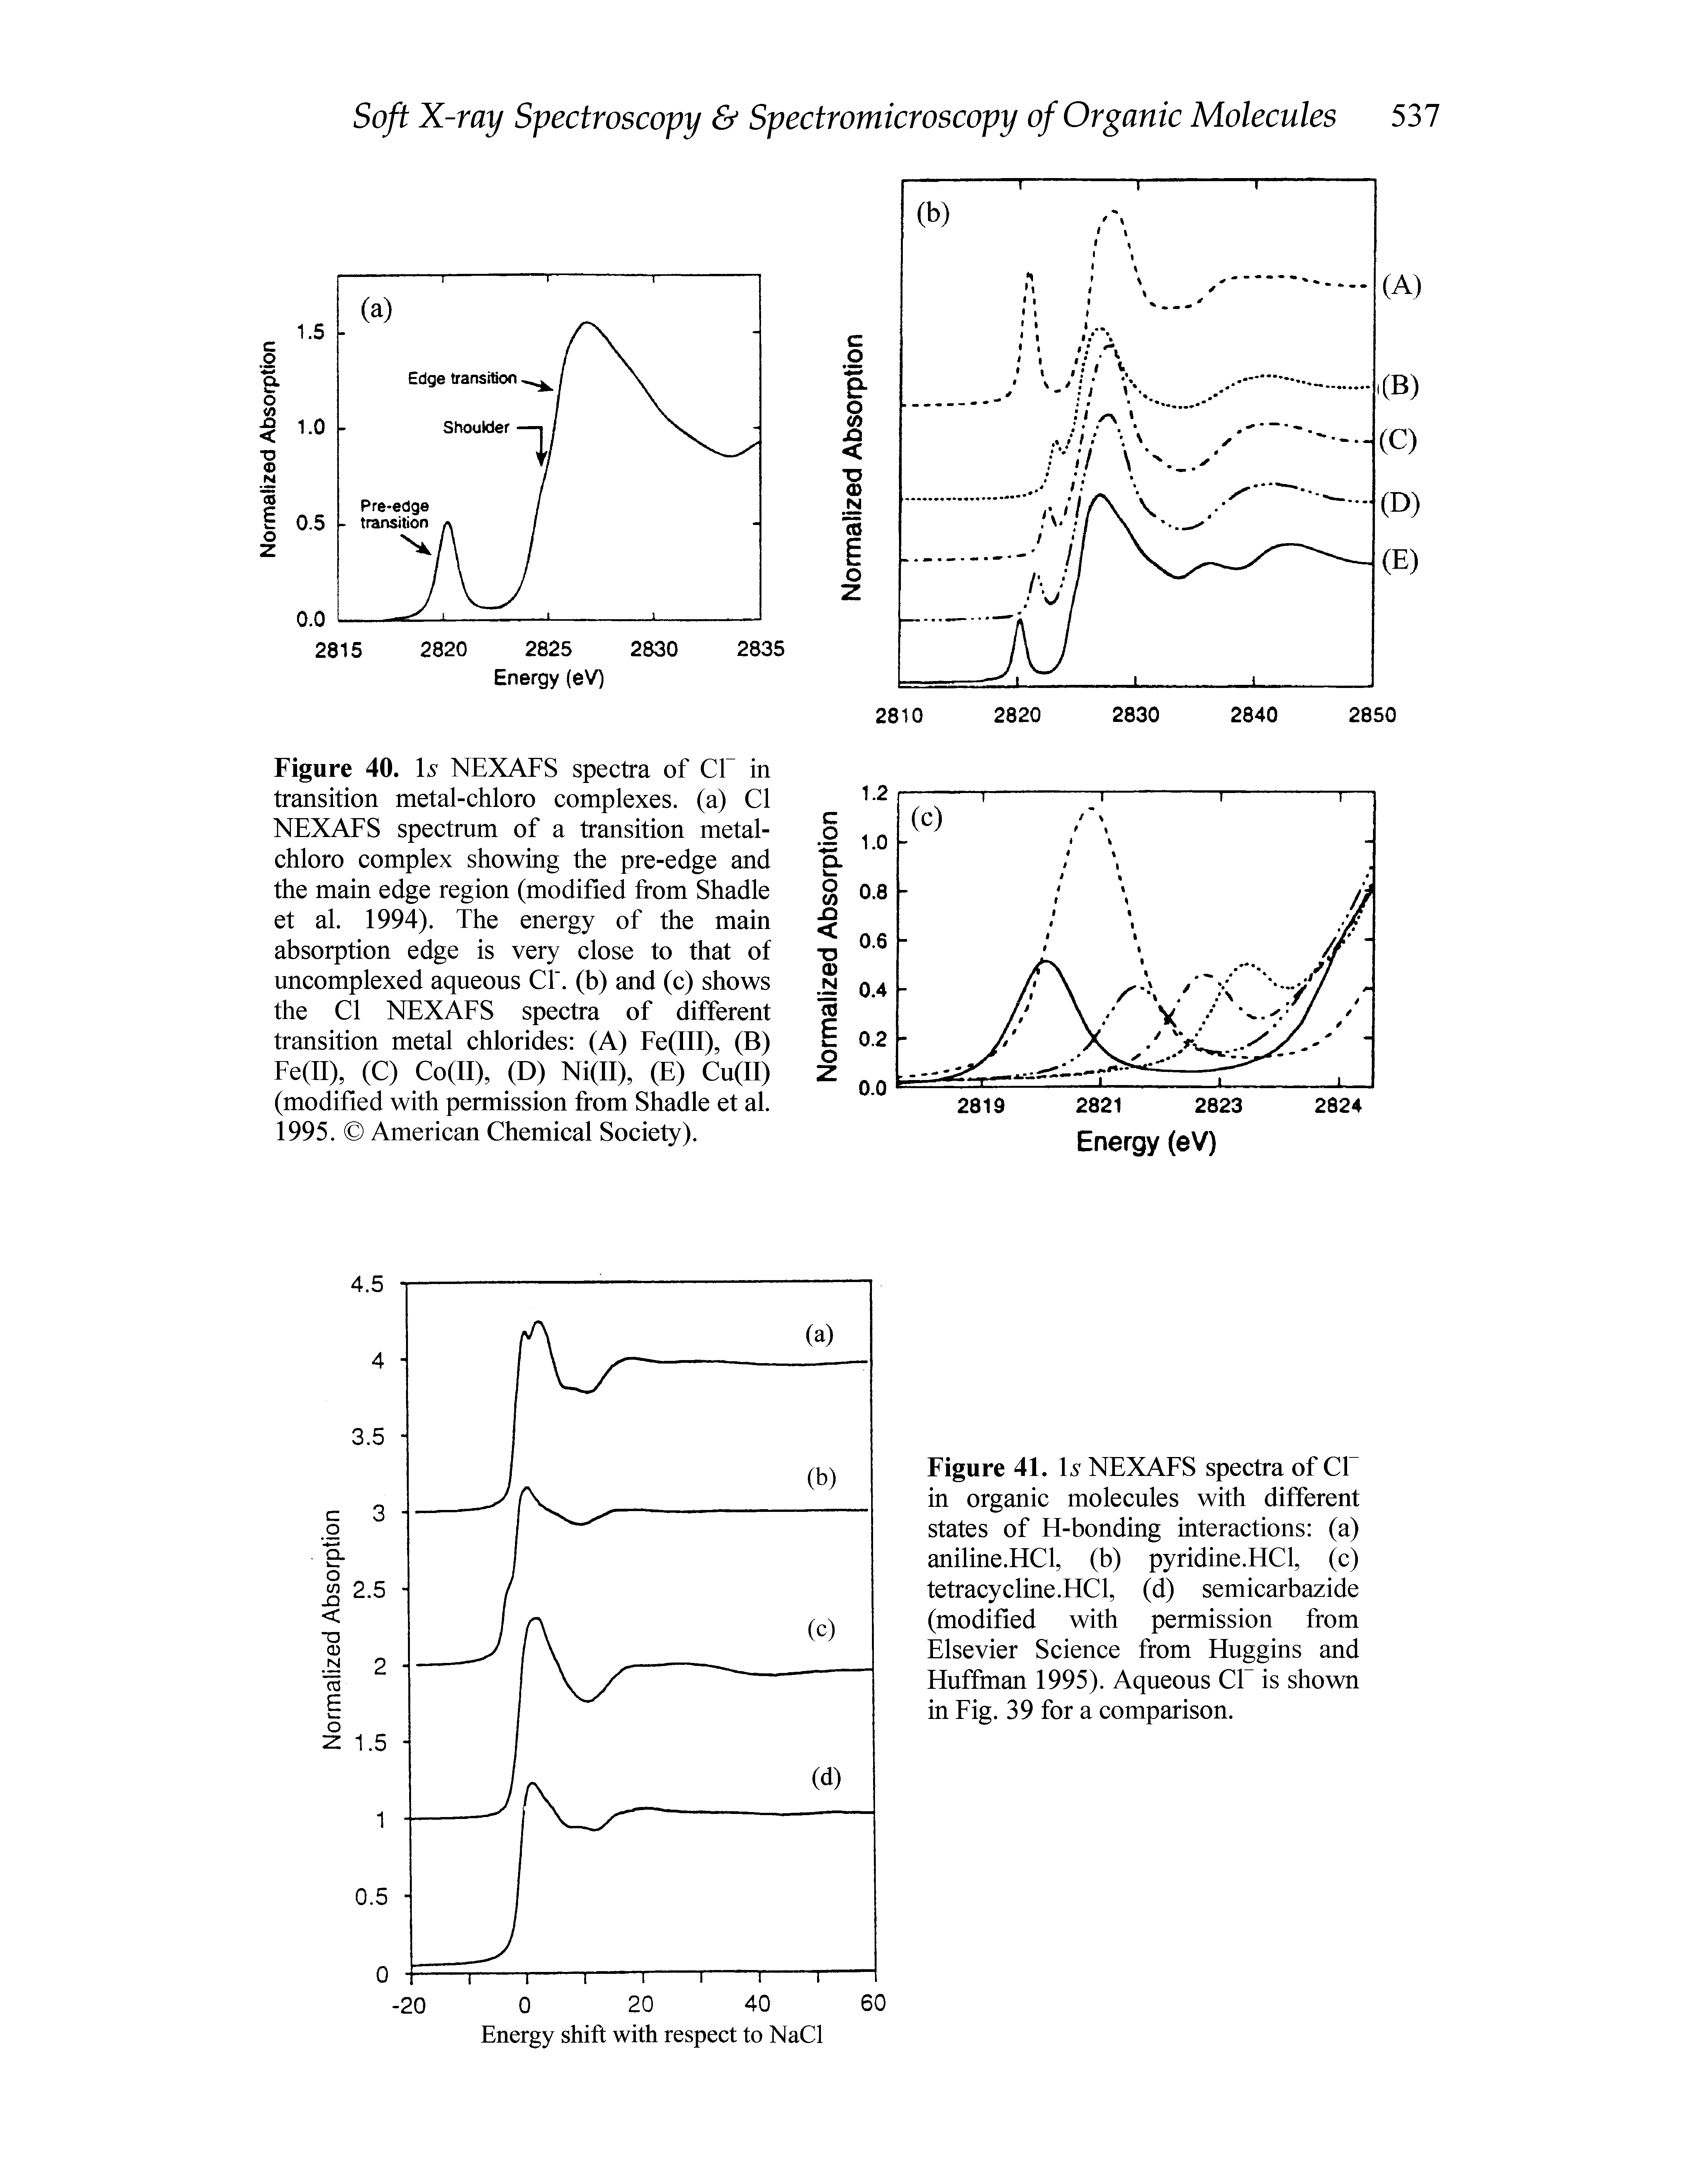 Figure 40. Is NEXAFS spectra of in transition metal-chloro complexes, (a) Cl NEXAFS spectrum of a transition metal-chloro complex showing the pre-edge and the main edge region (modified from Shadle et al. 1994). The energy of the main absorption edge is very close to that of uncomplexed aqueous . (b) and (c) shows the Cl NEXAFS spectra of different transition metal chlorides (A) Fe(III), (B) Fe(II), (C) Co(II), (D) Ni(II), (E) Cu(II) (modified with permission from Shadle et al. 1995. American Chemical Society).